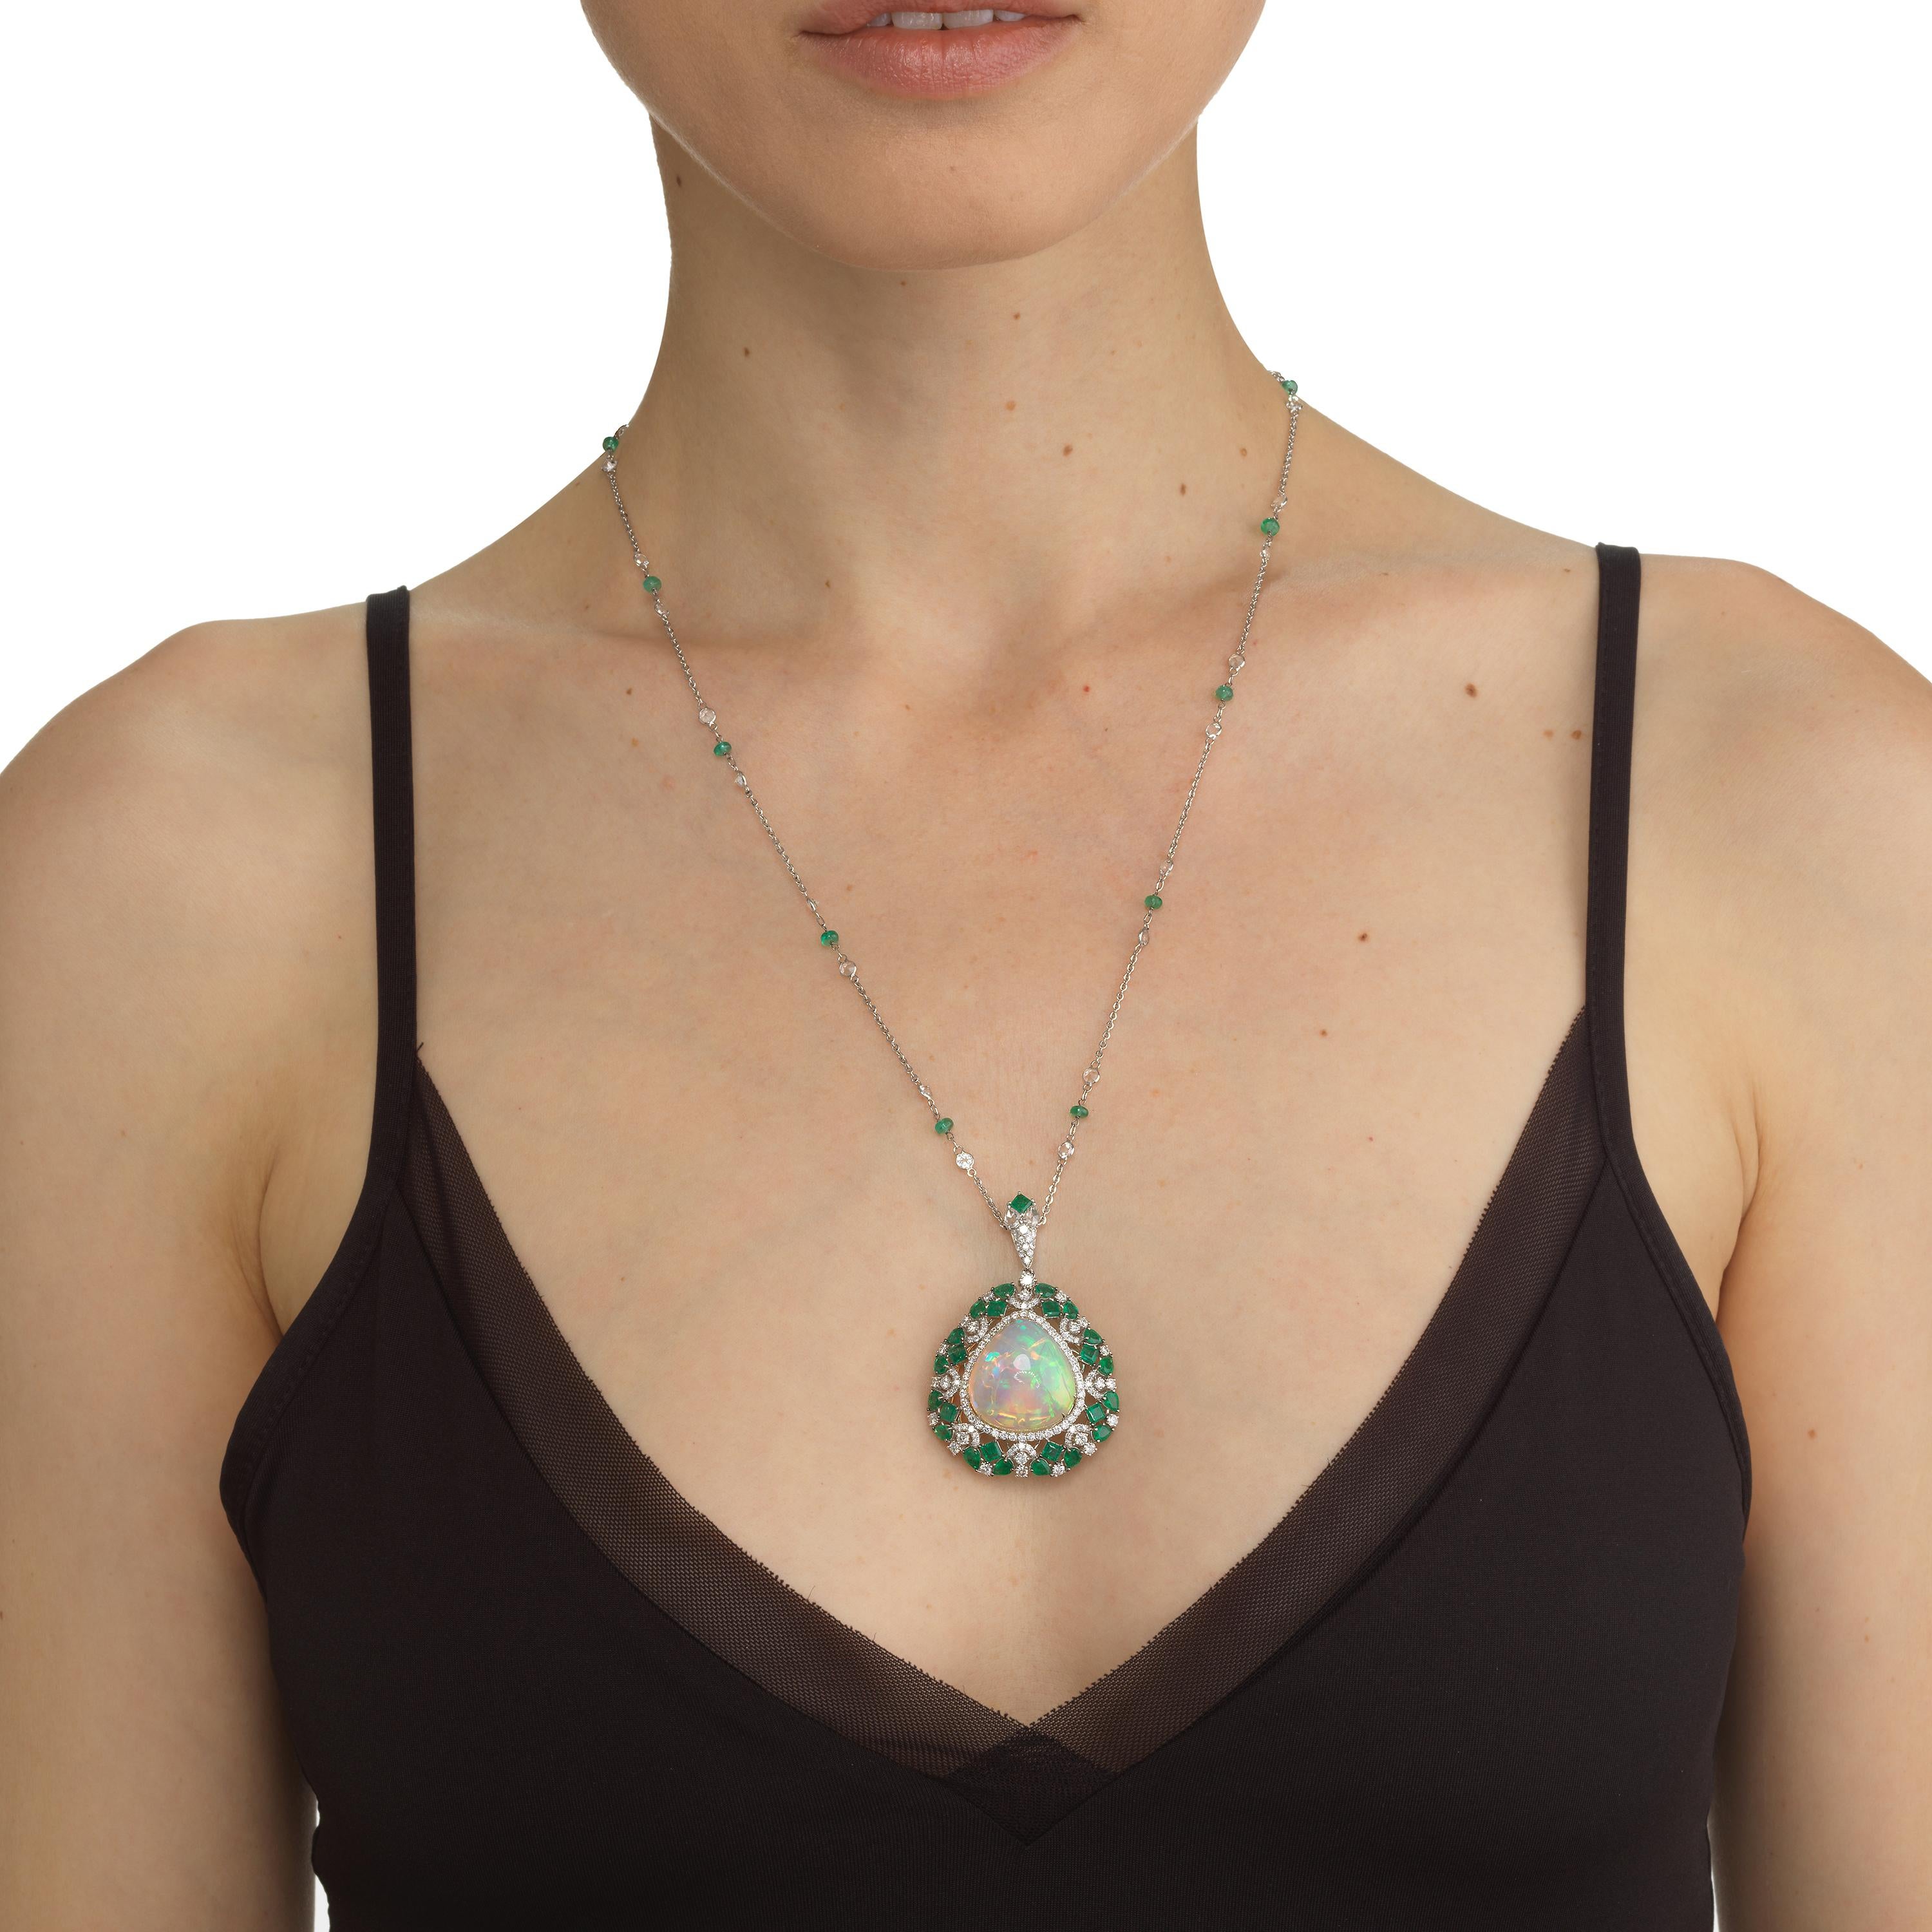 Adorn your neckline with this gorgeous pendant necklace. This necklace comes with 1 Ethiopian opal, 28 emerald and 217 pave diamonds. Crafted in 18K white gold this pendant necklace is a must have.
JEWELRY SPECIFICATION:
Gross Weight: 22.69